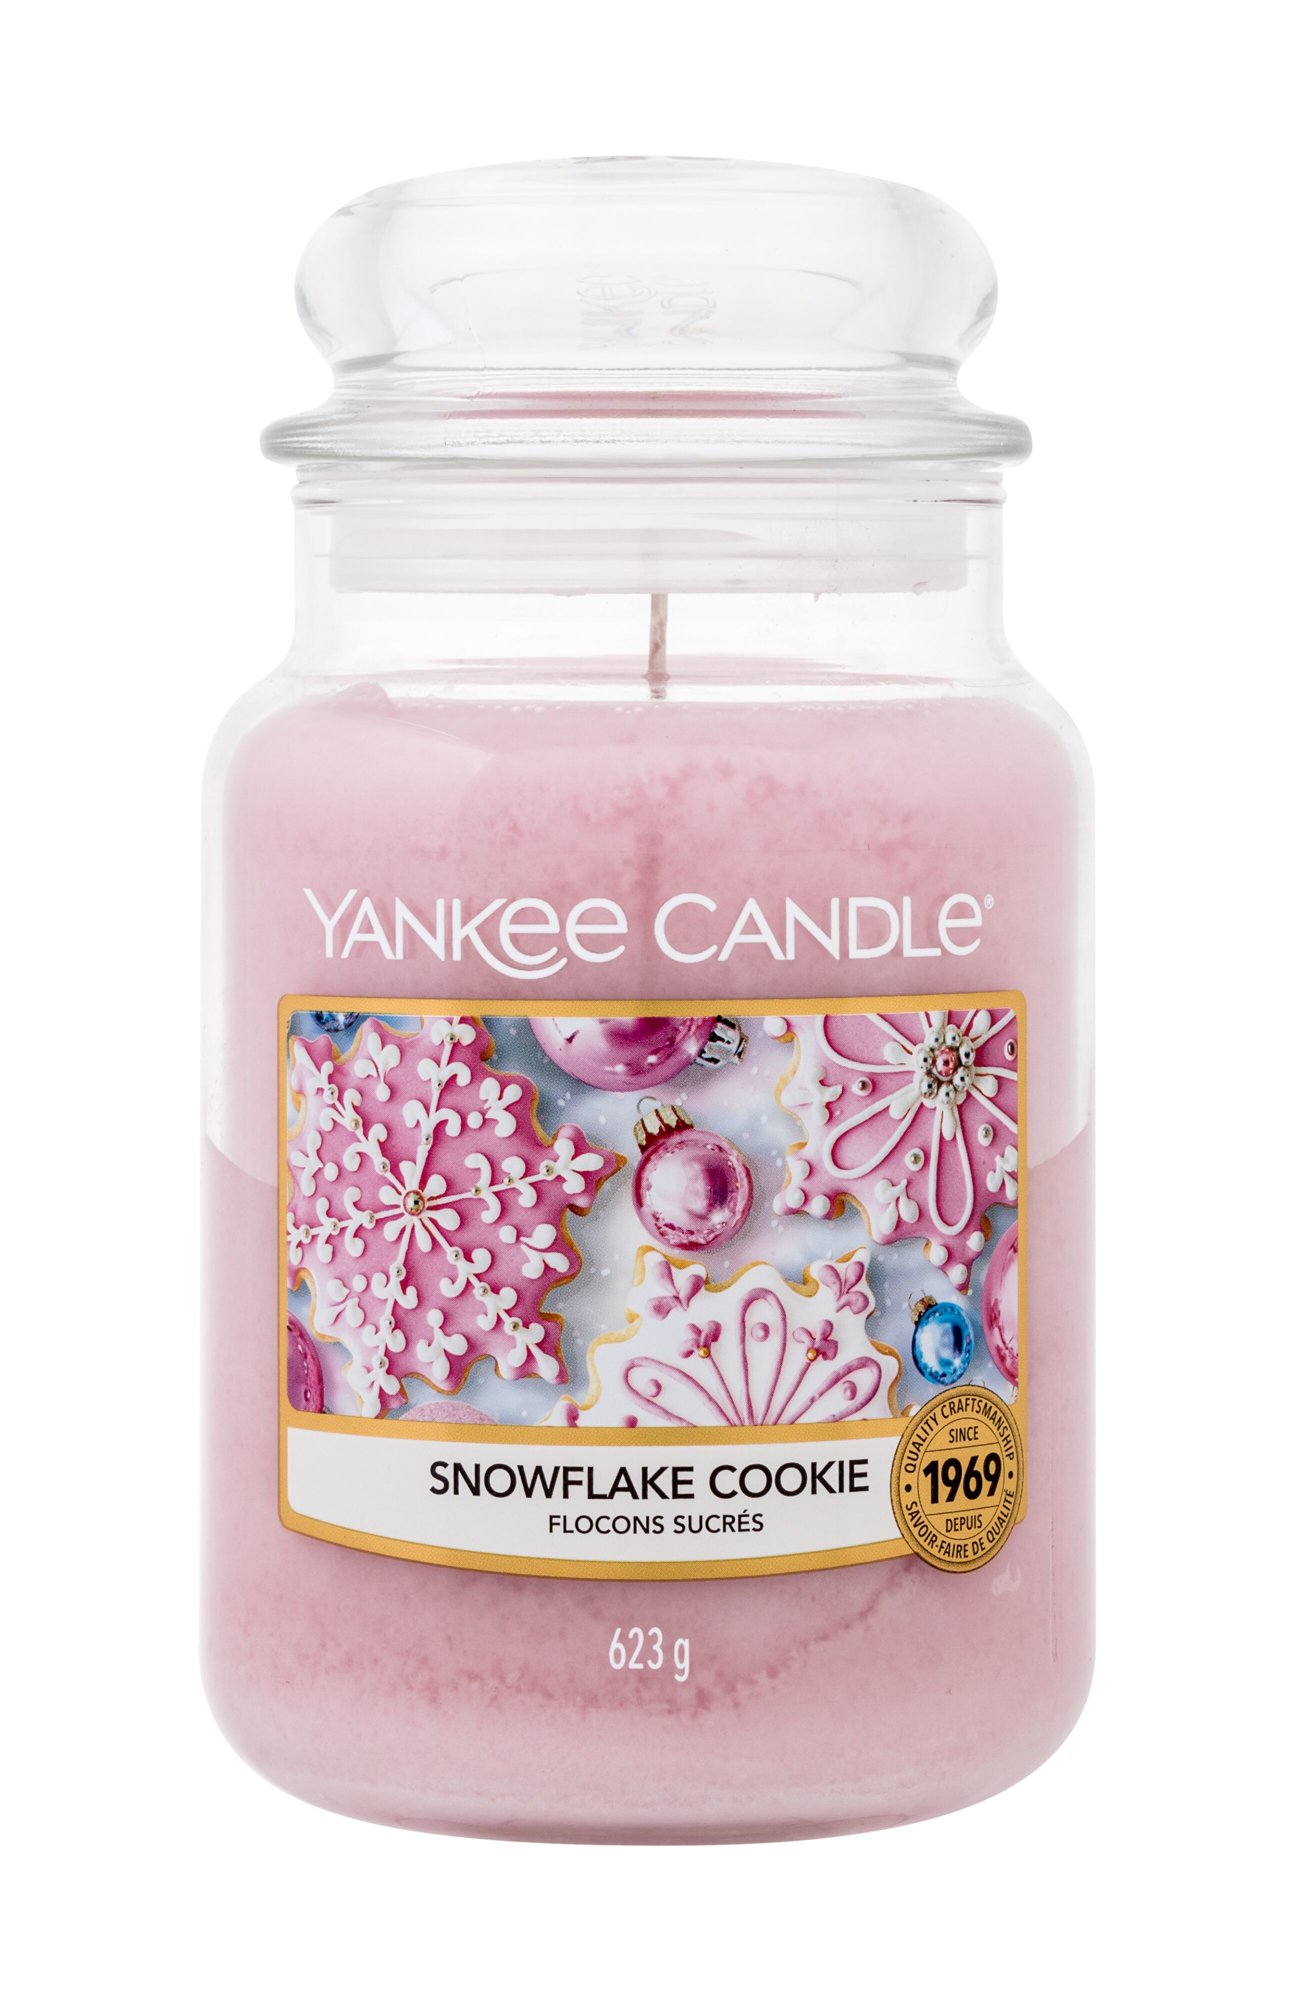 Yankee Candle Snowflake Cookie 623g Kvepalai Unisex Scented Candle